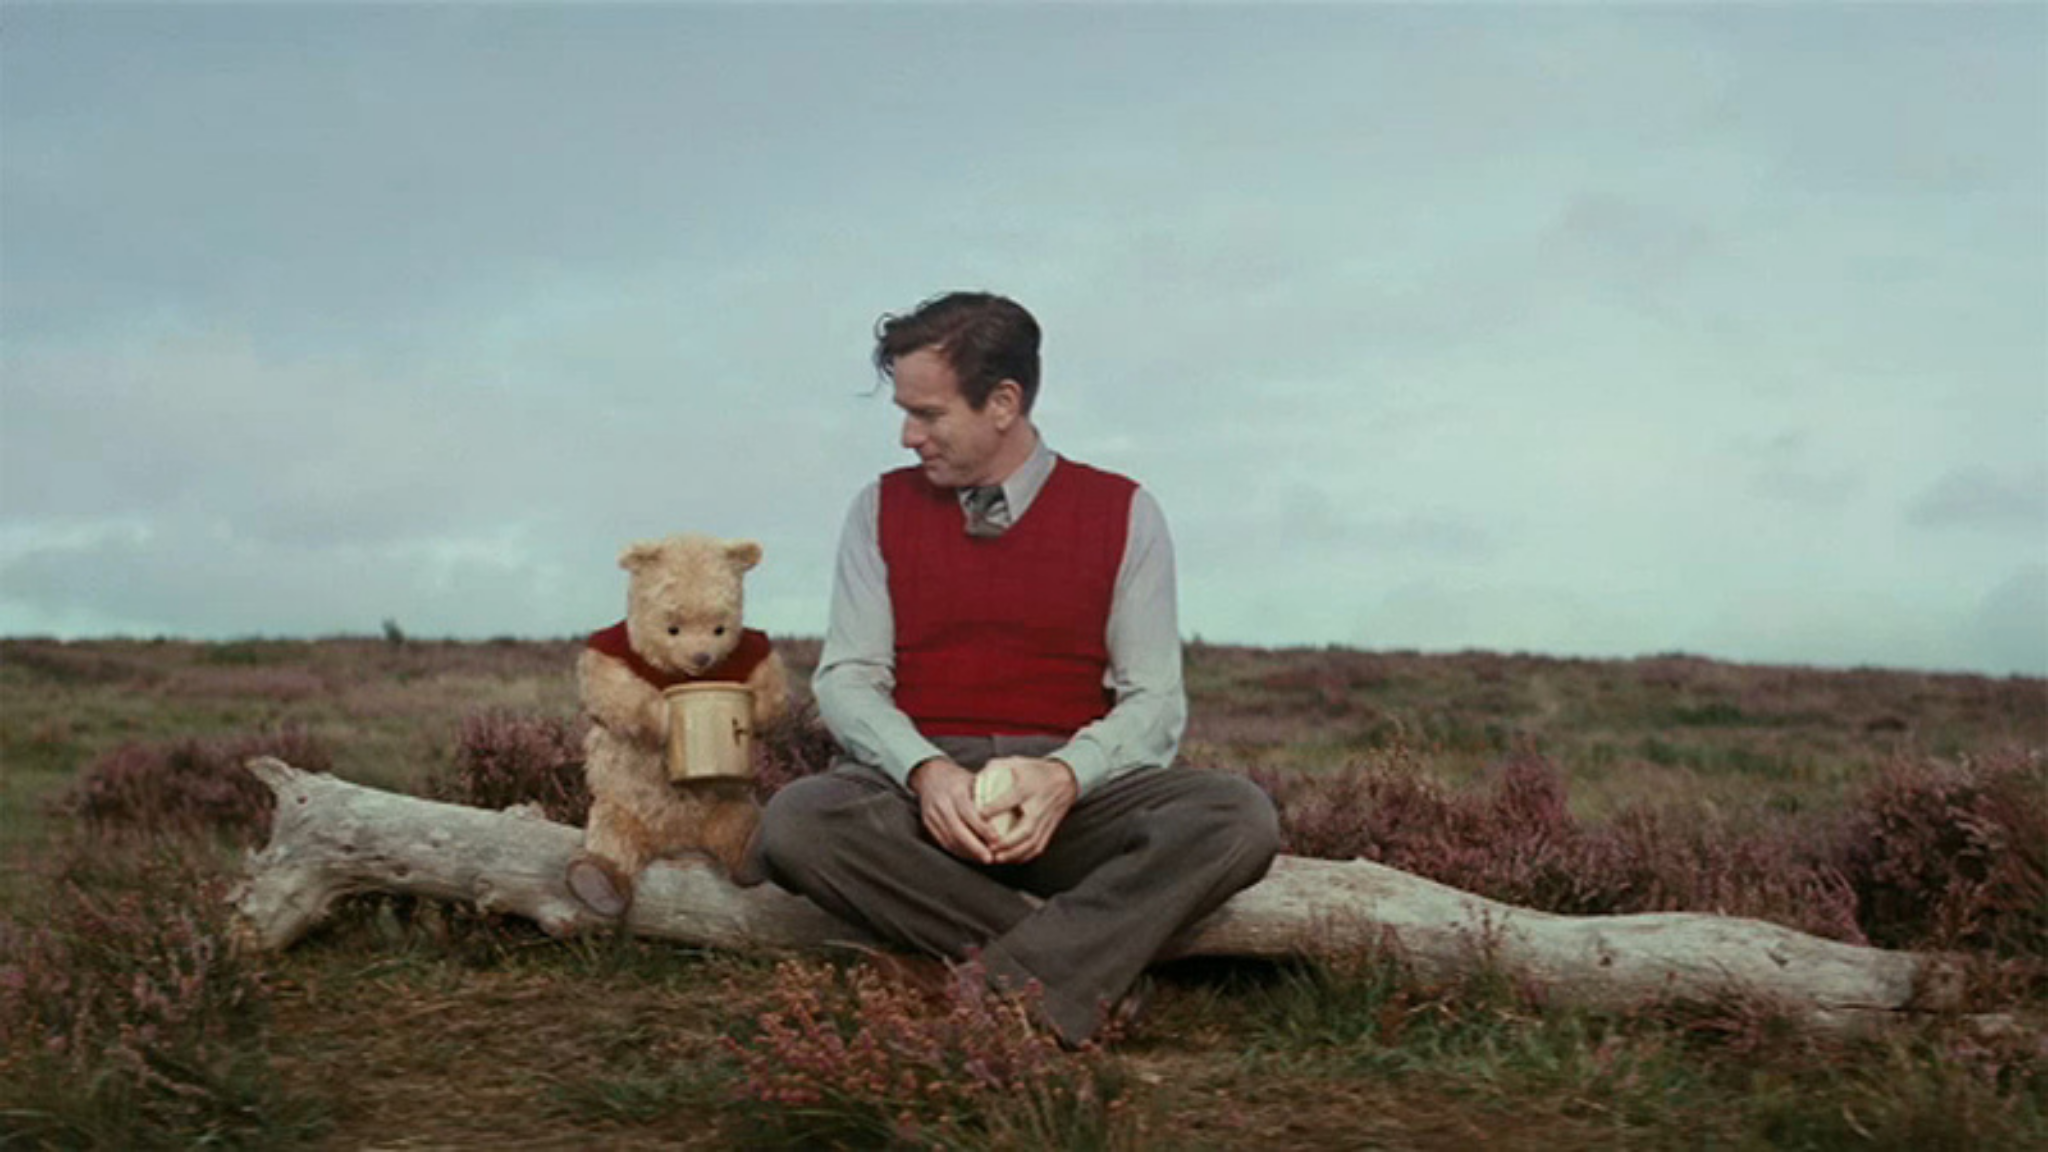 Christopher Robin 2018 Movie Poster Wallpapers